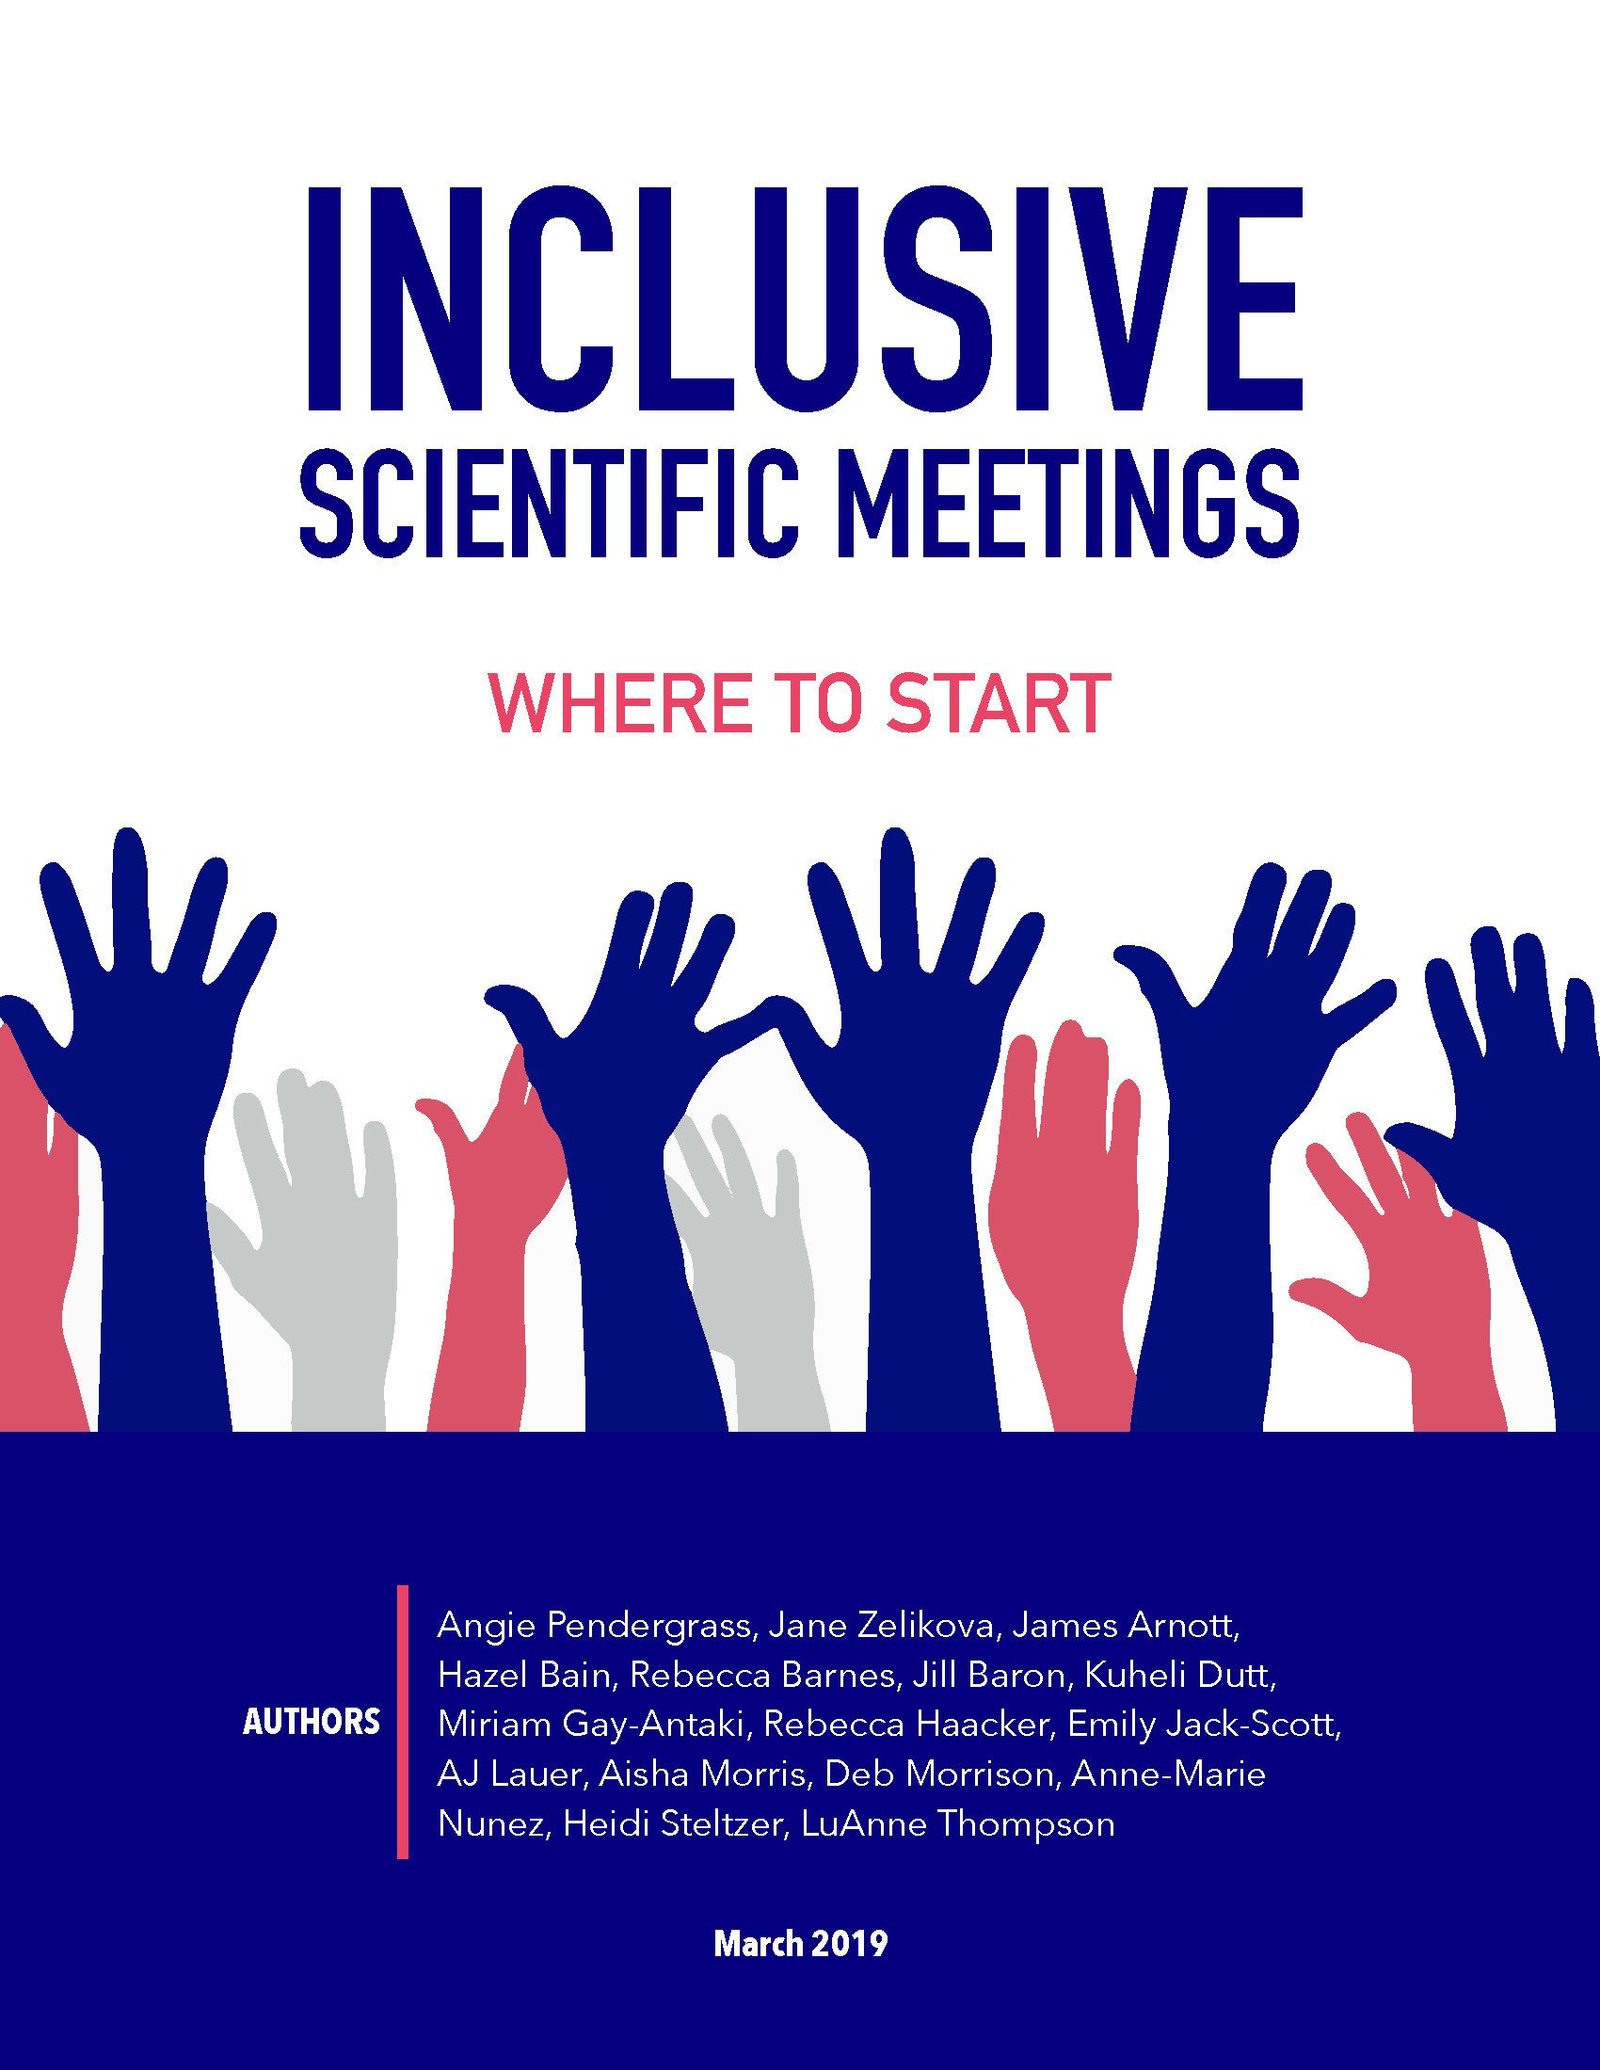 Guideline&#x20;to&#x20;Inclusive&#x20;Scientific&#x20;Meetings